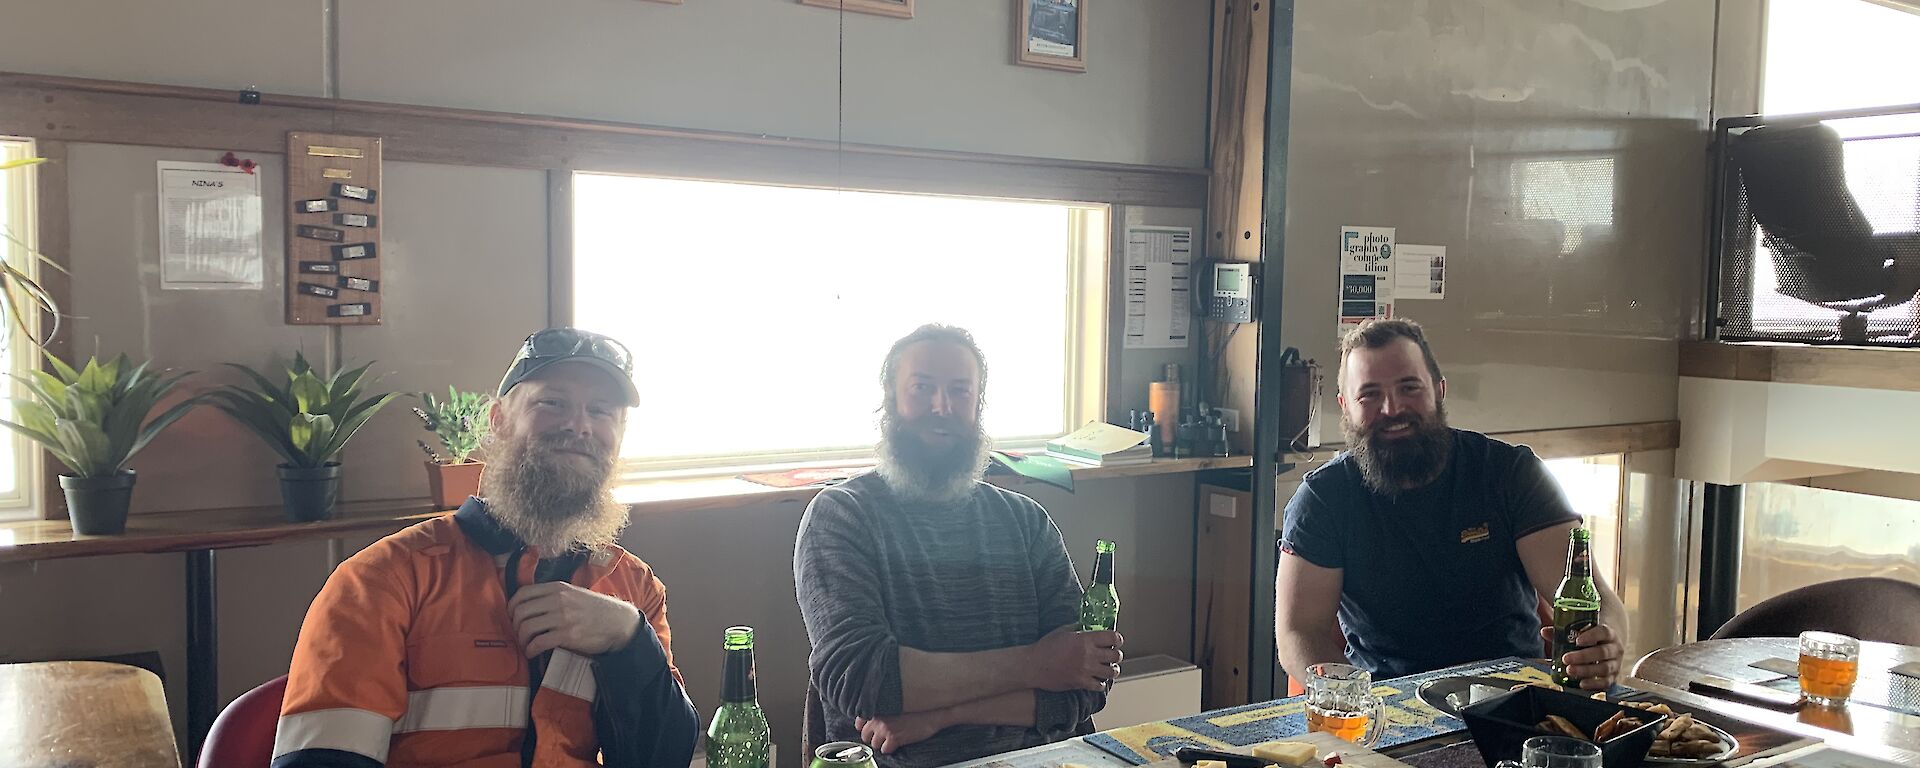 Three plumbers sitting at a table drinking beer